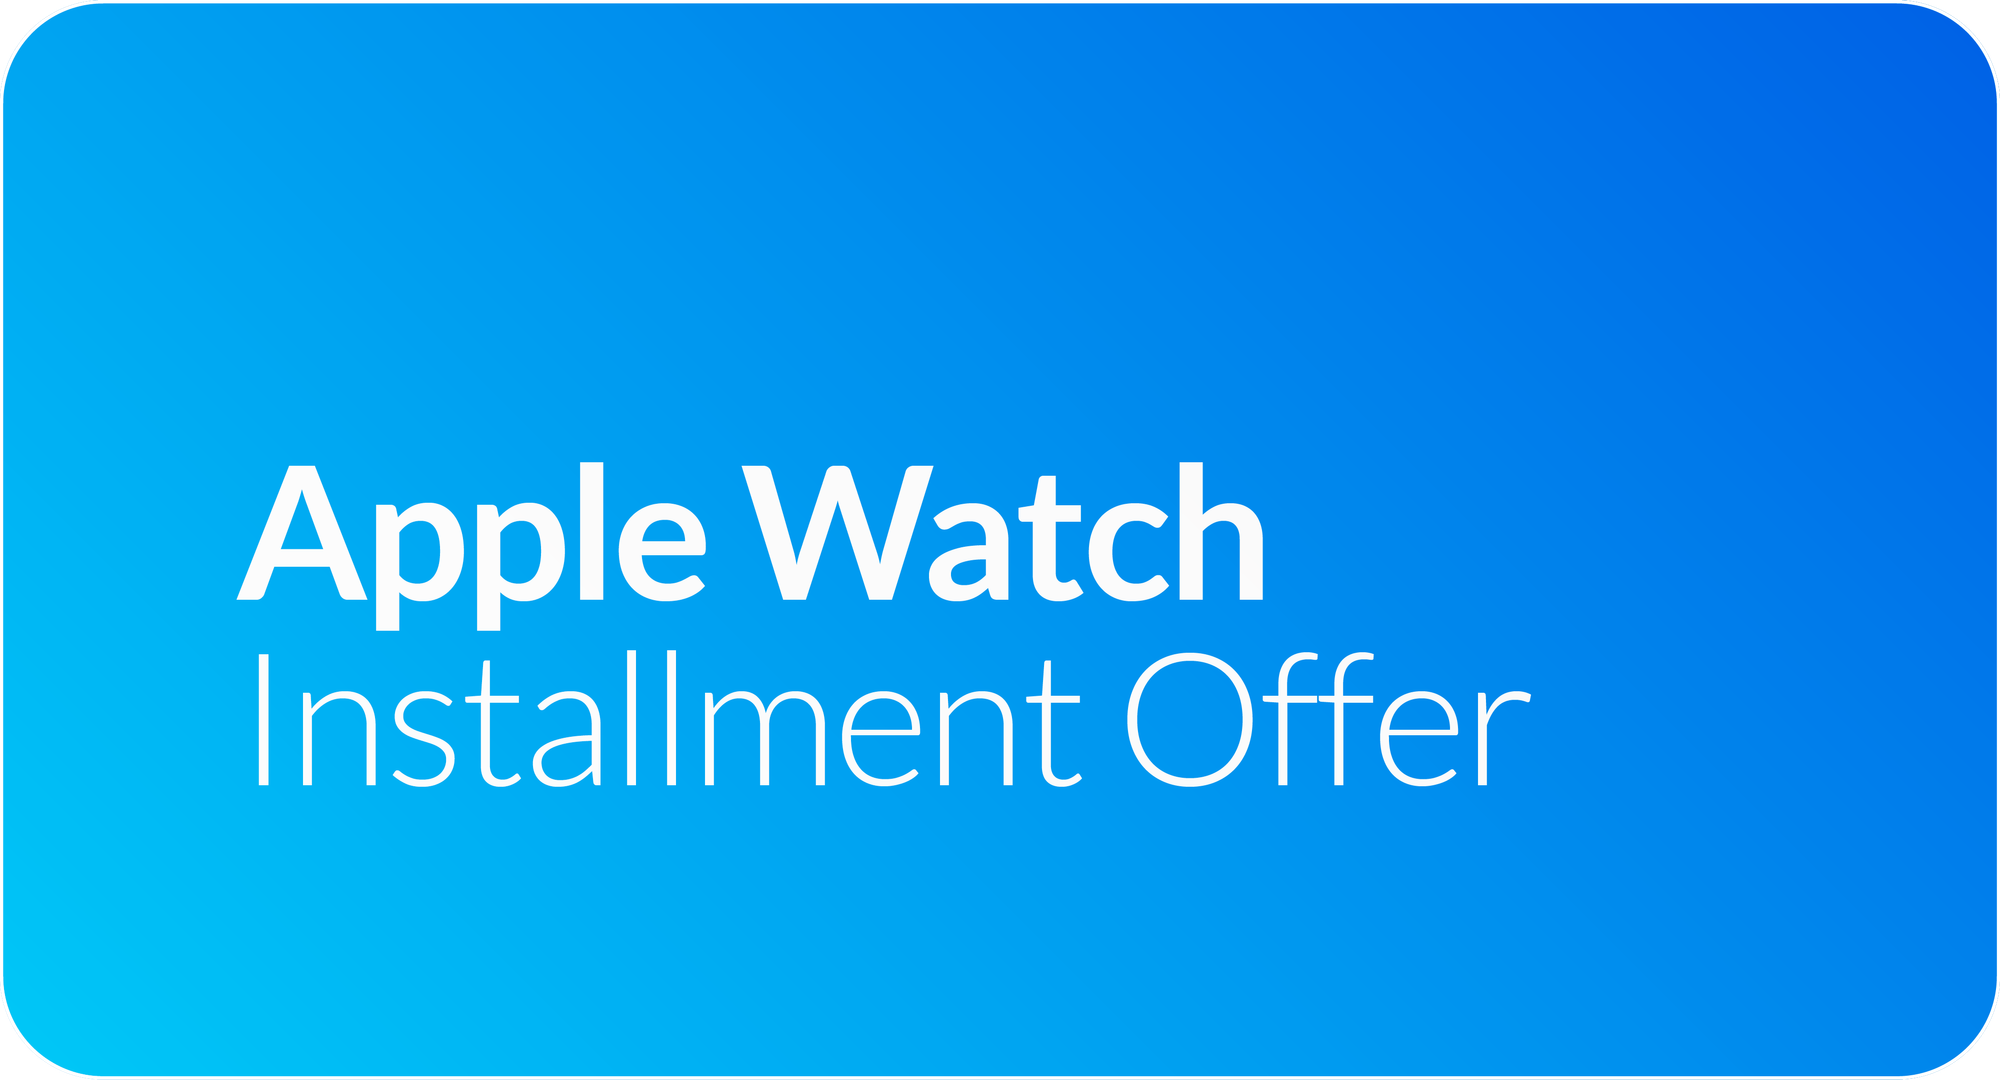 Get the best Apple deal with easy payment options for Apple Watch!